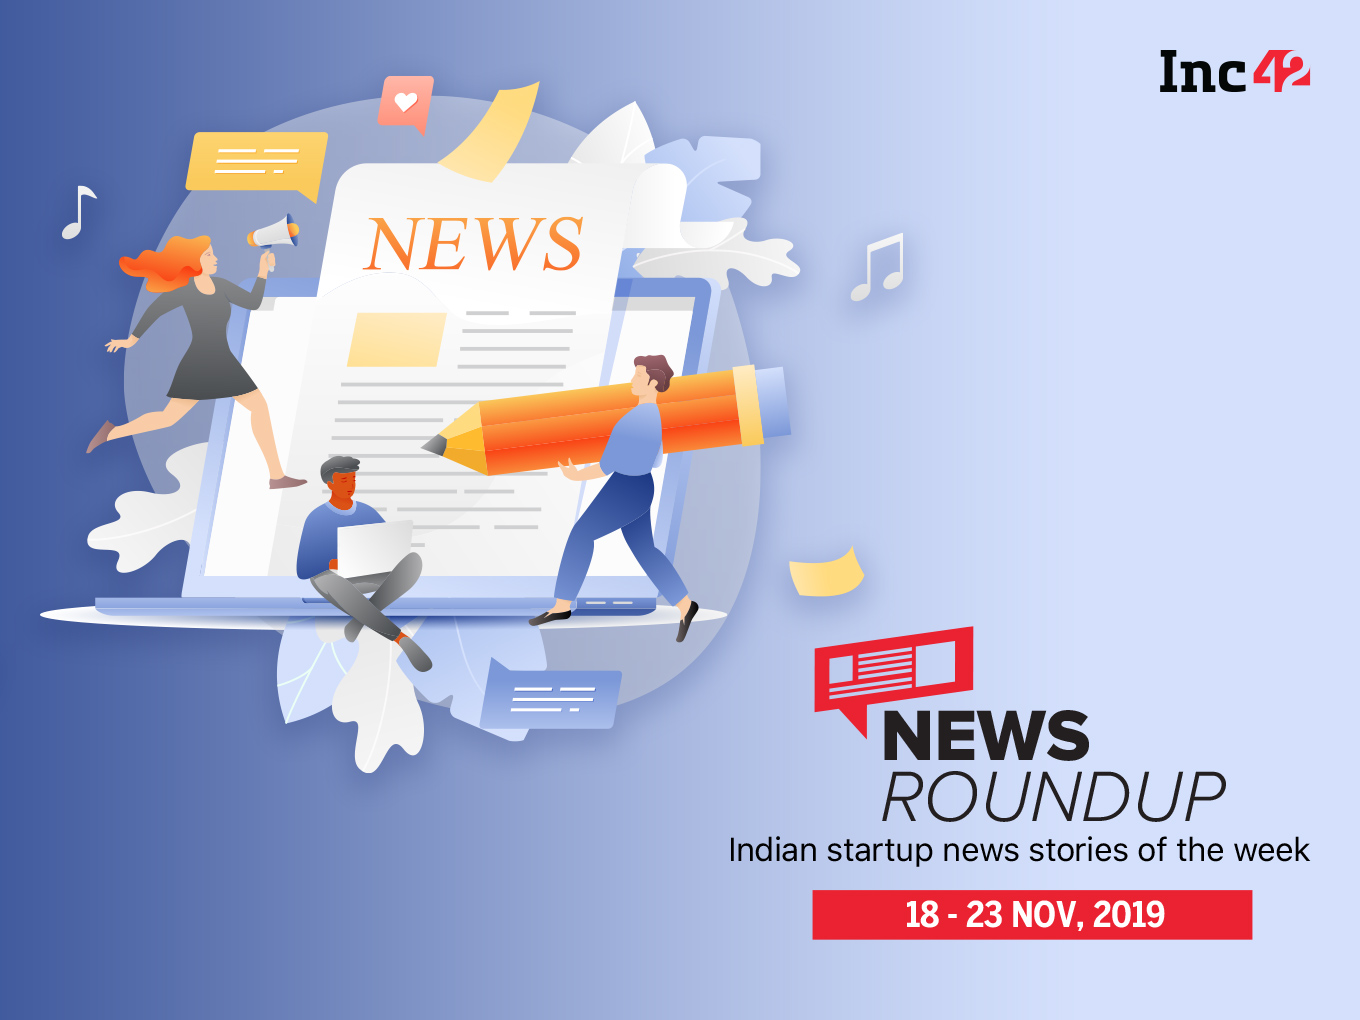 News Roundup: 11 Indian Startup News Stories You Don’t Want To Miss This Week [Nov 18 - 22]